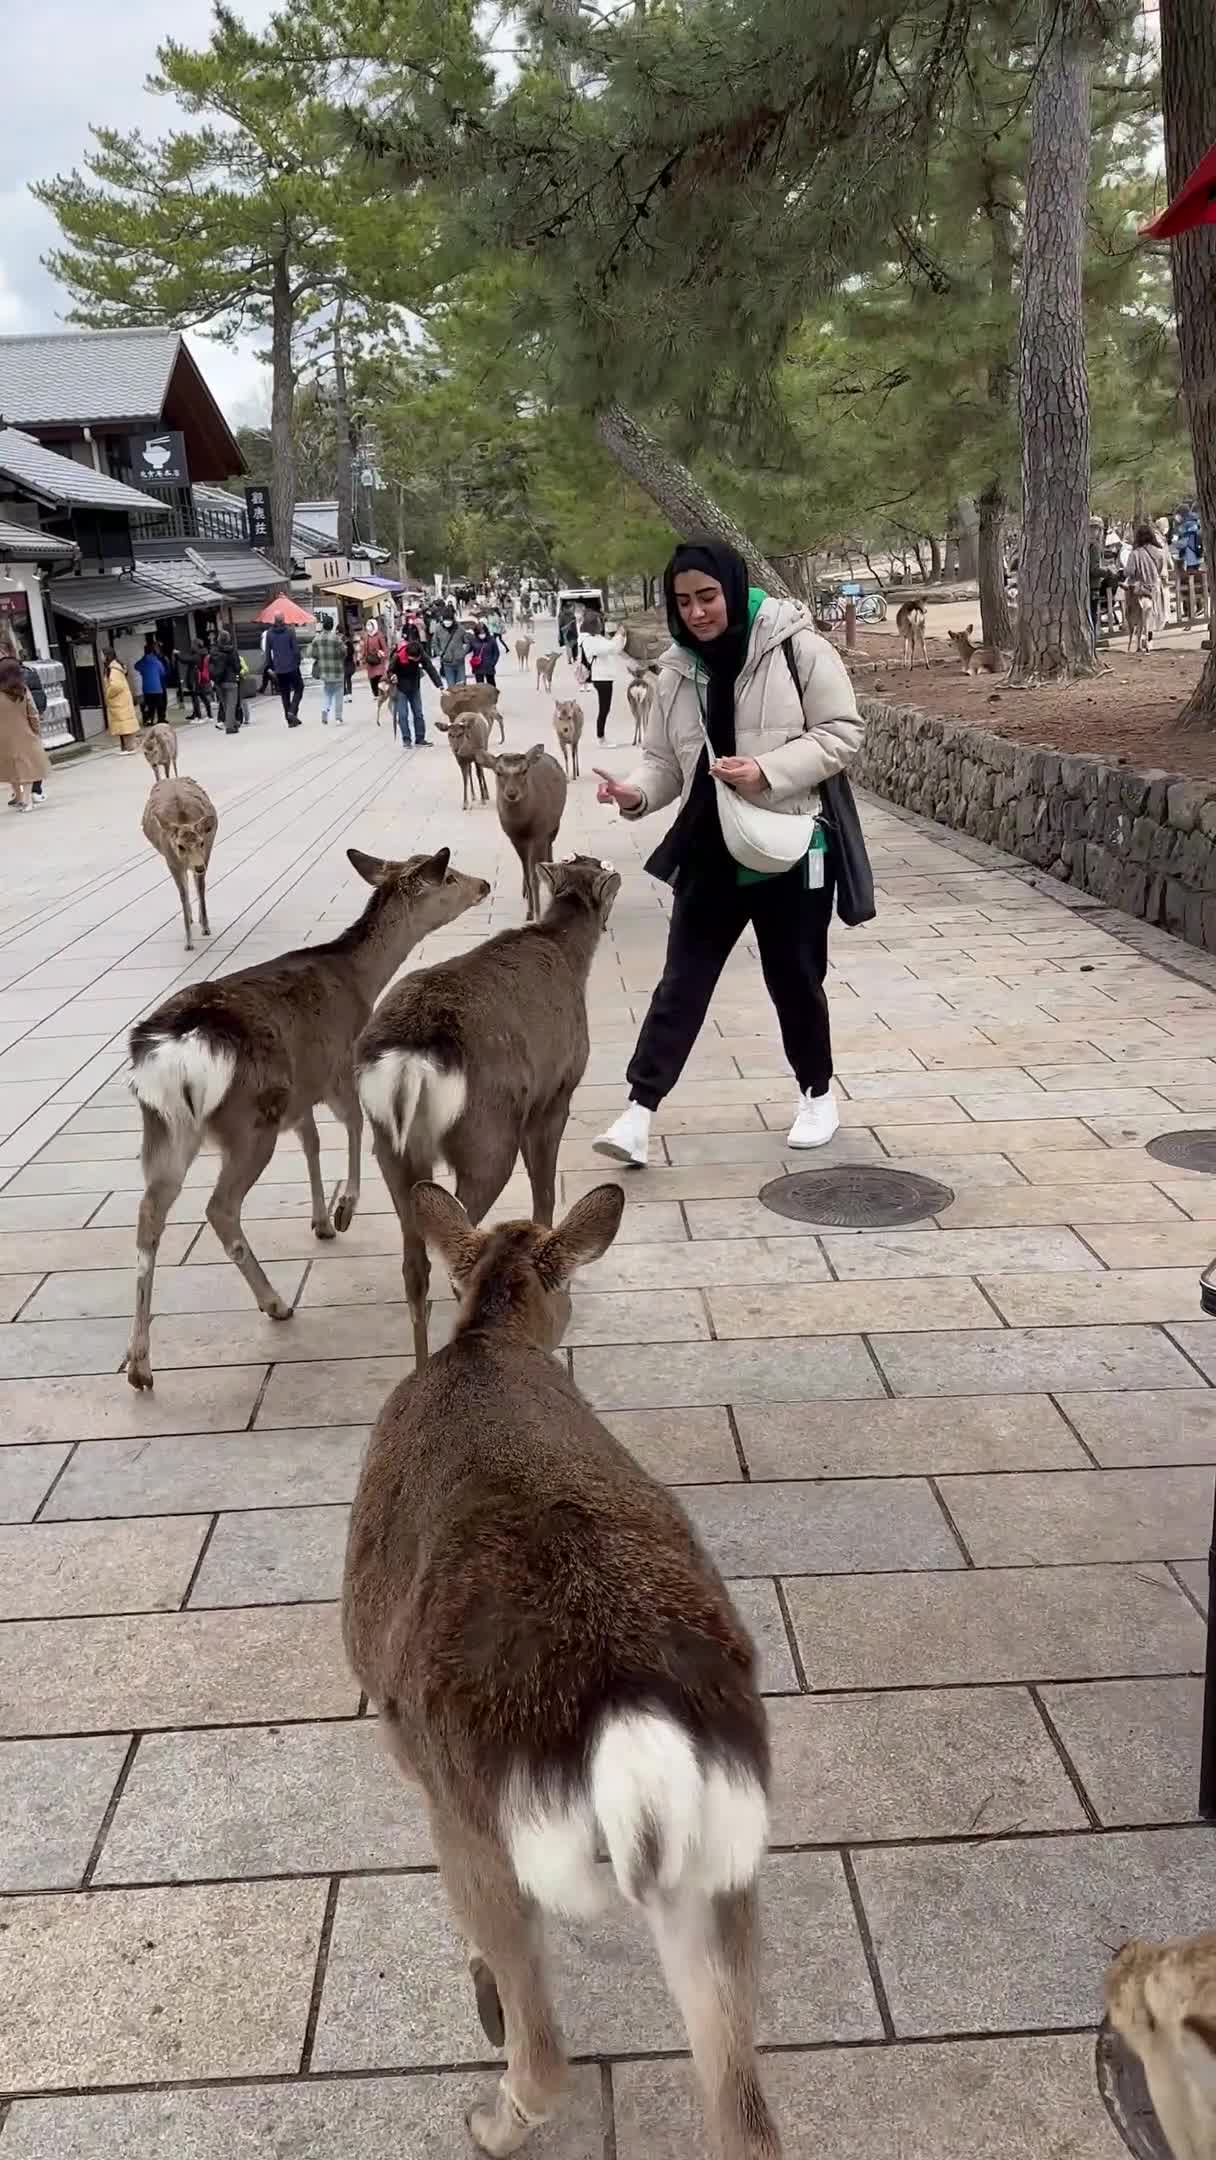 Group of Deer Chase Woman For Food